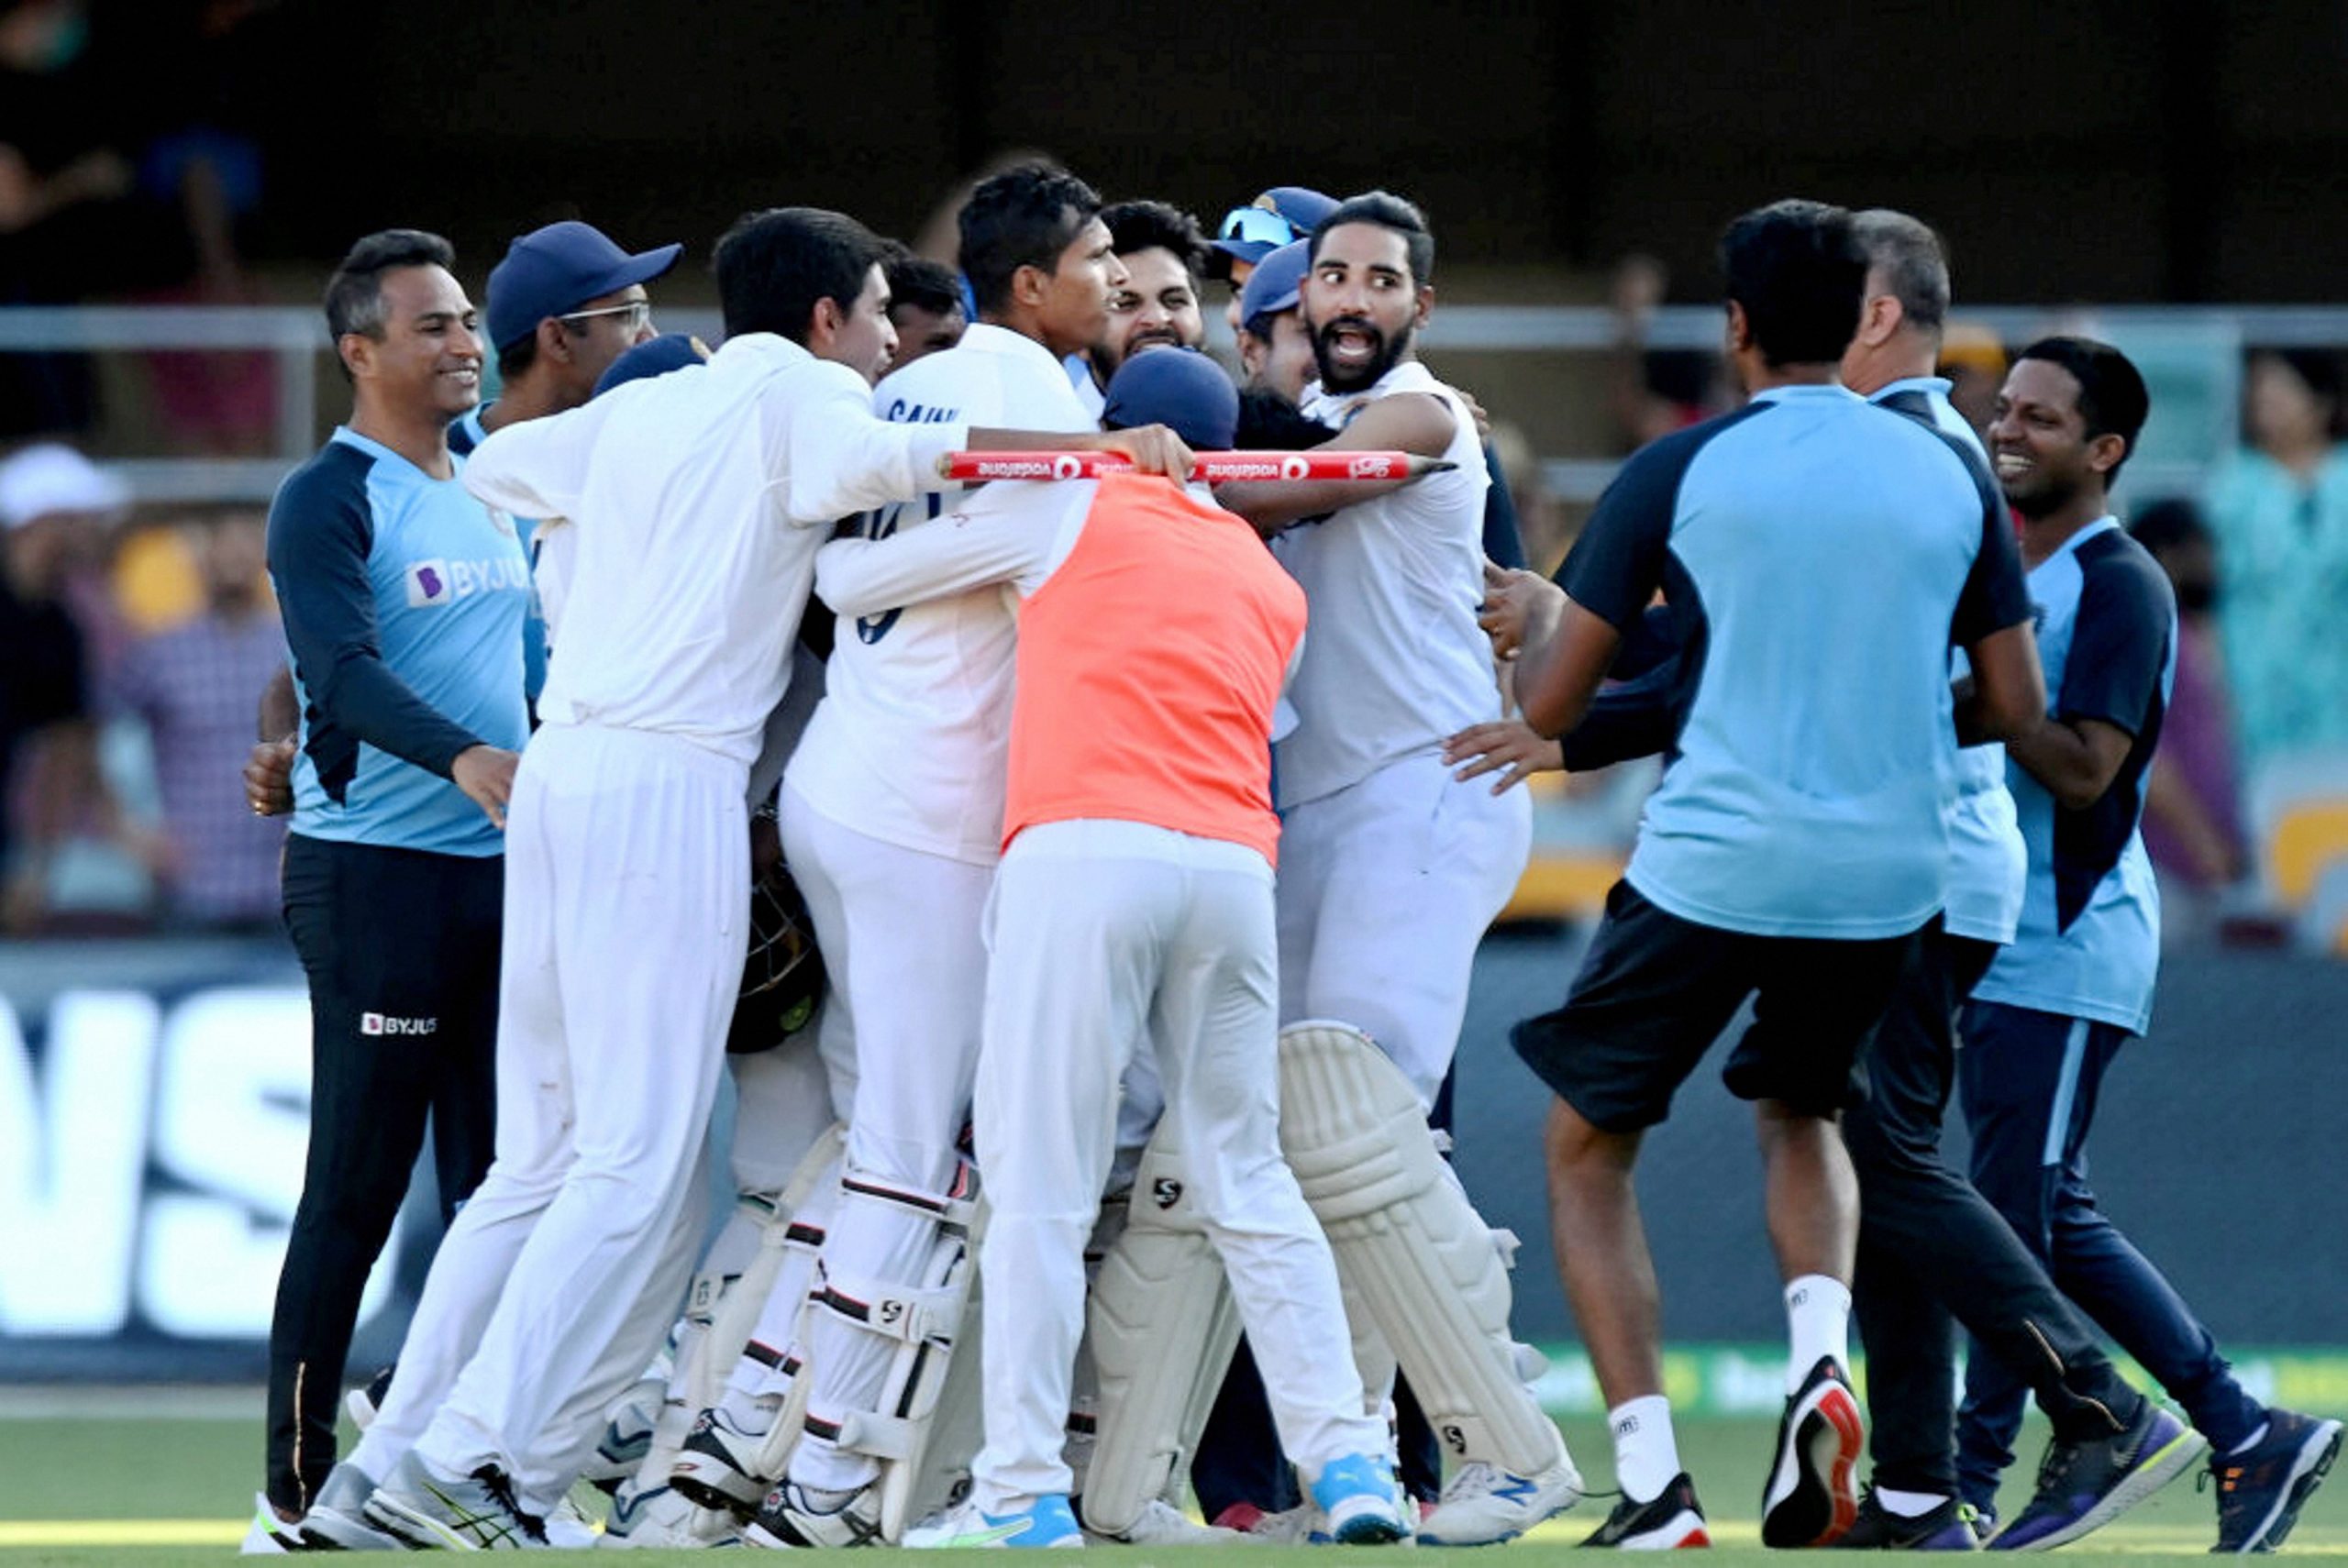 Bollywood congratulates Indian cricket team on historic Test series win